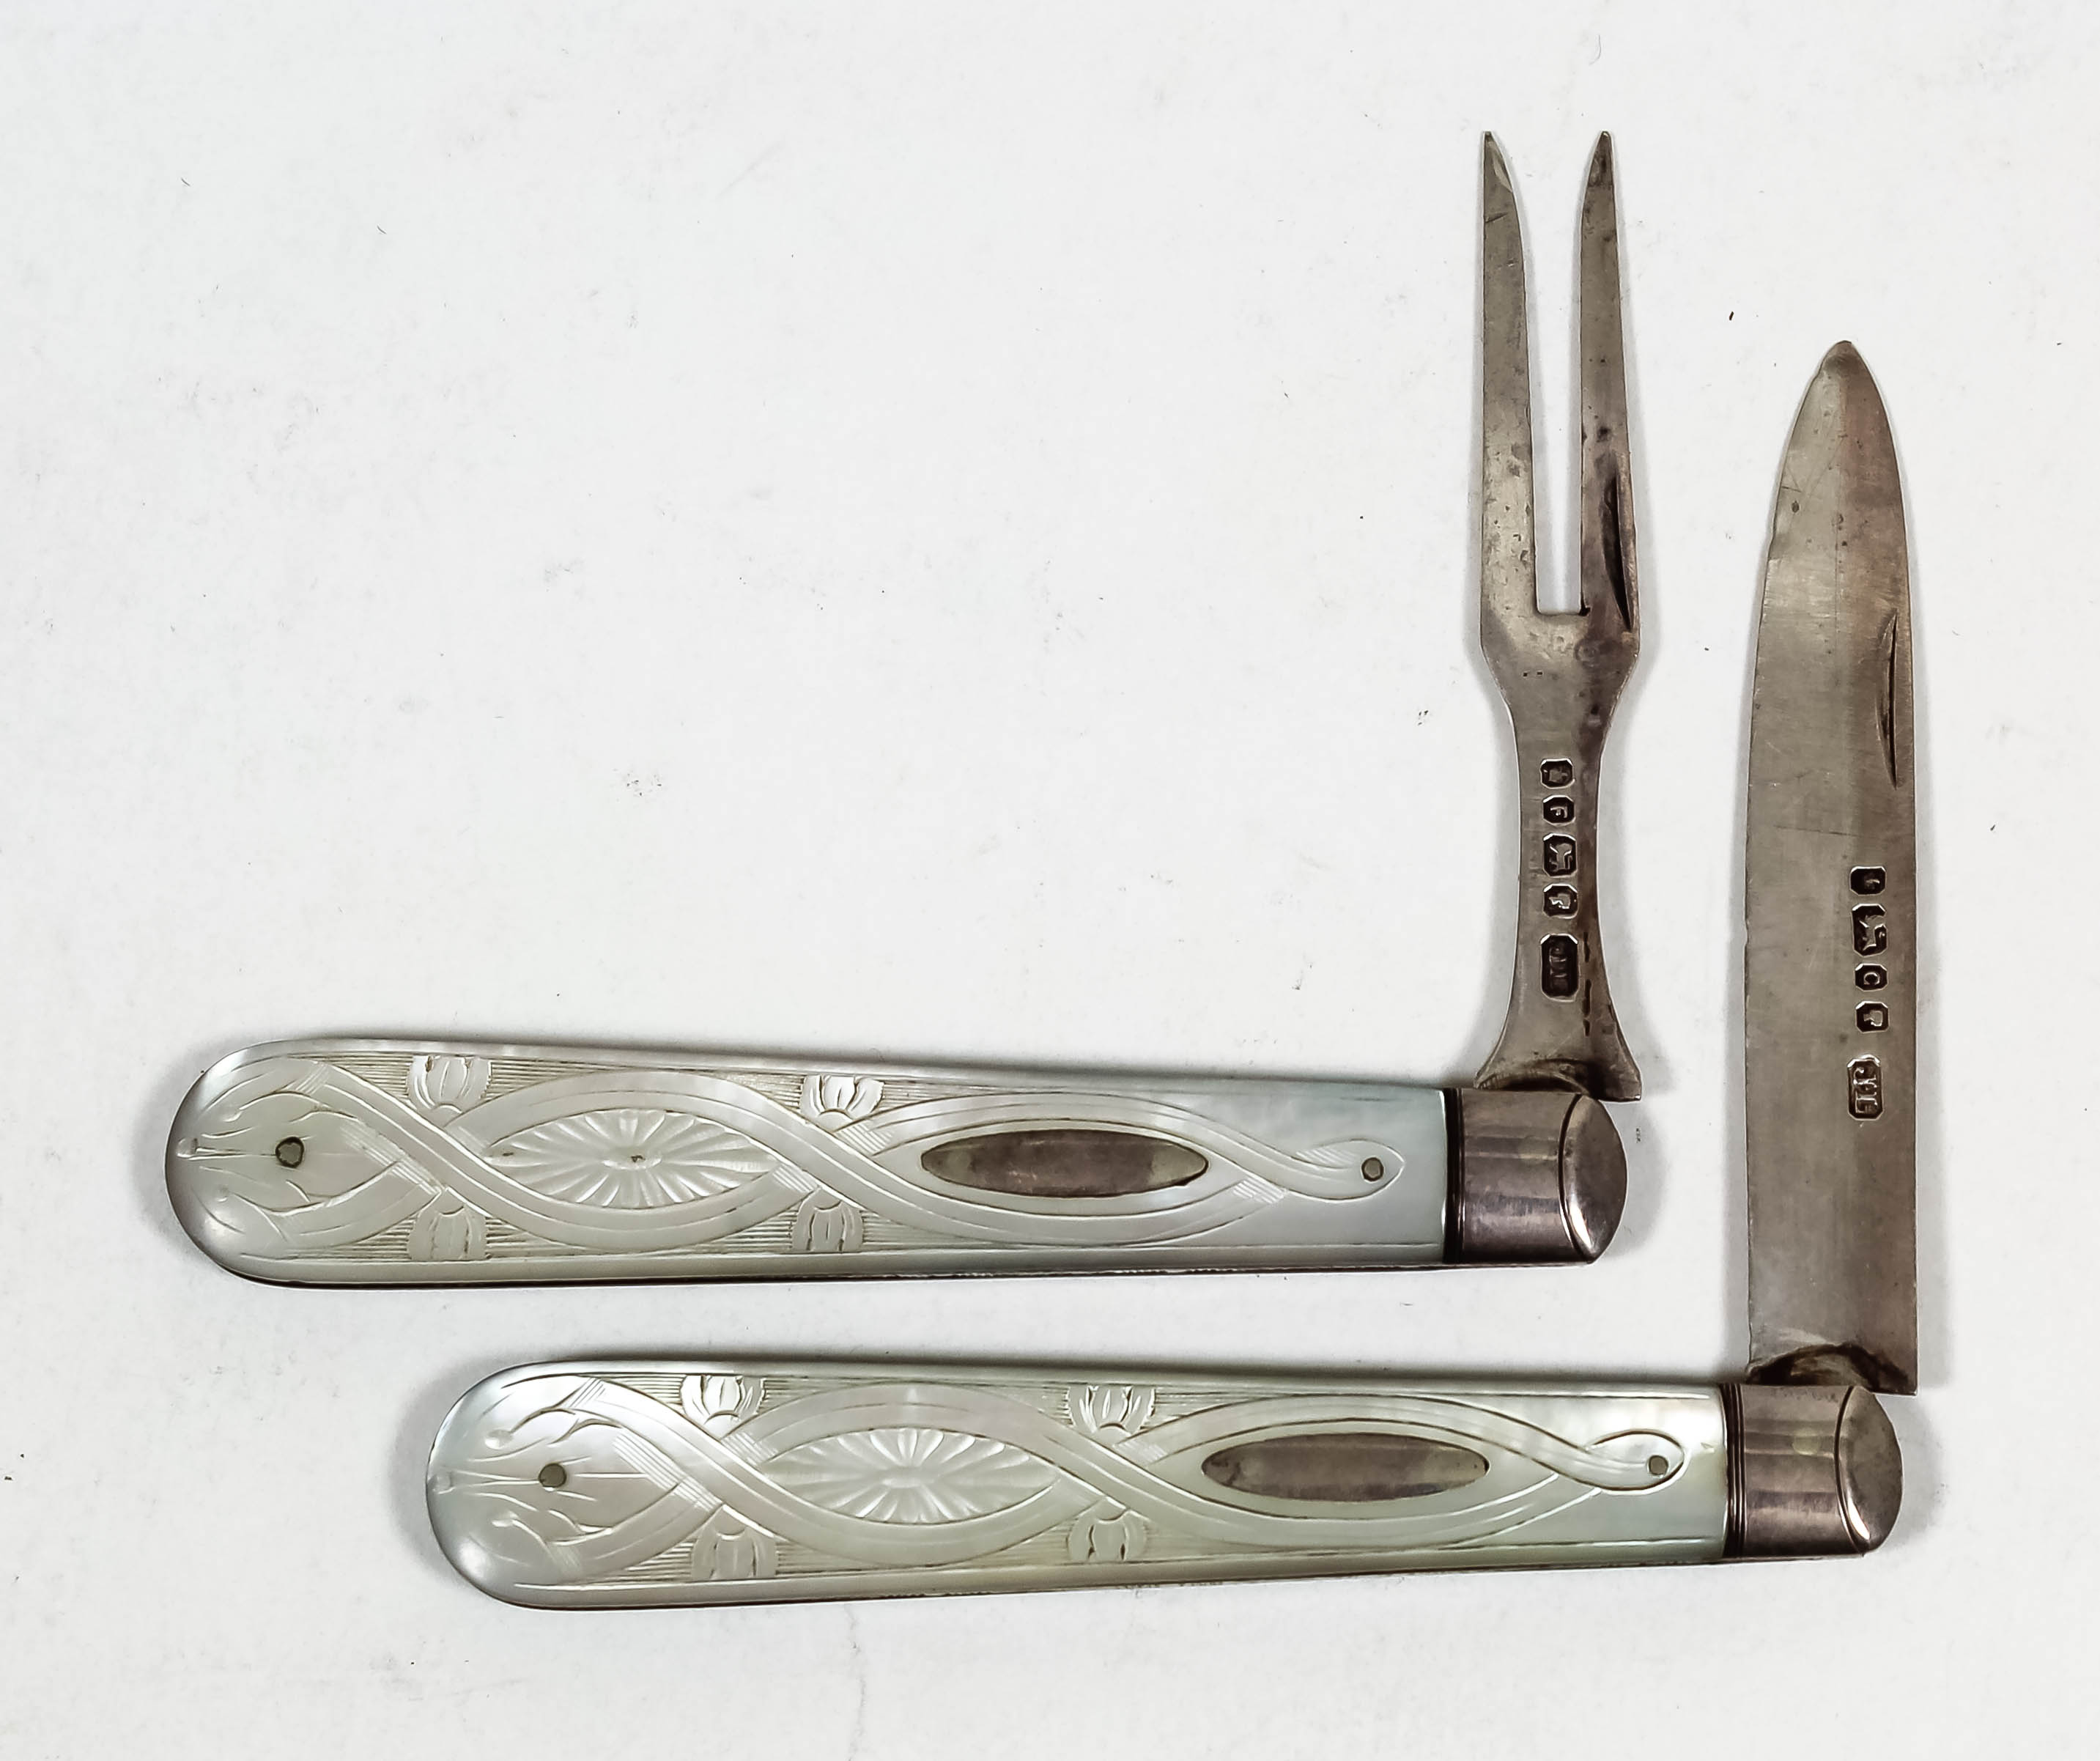 A Victorian silver and mother of pearl handled pocket fruit knife and fork, the handles carved with